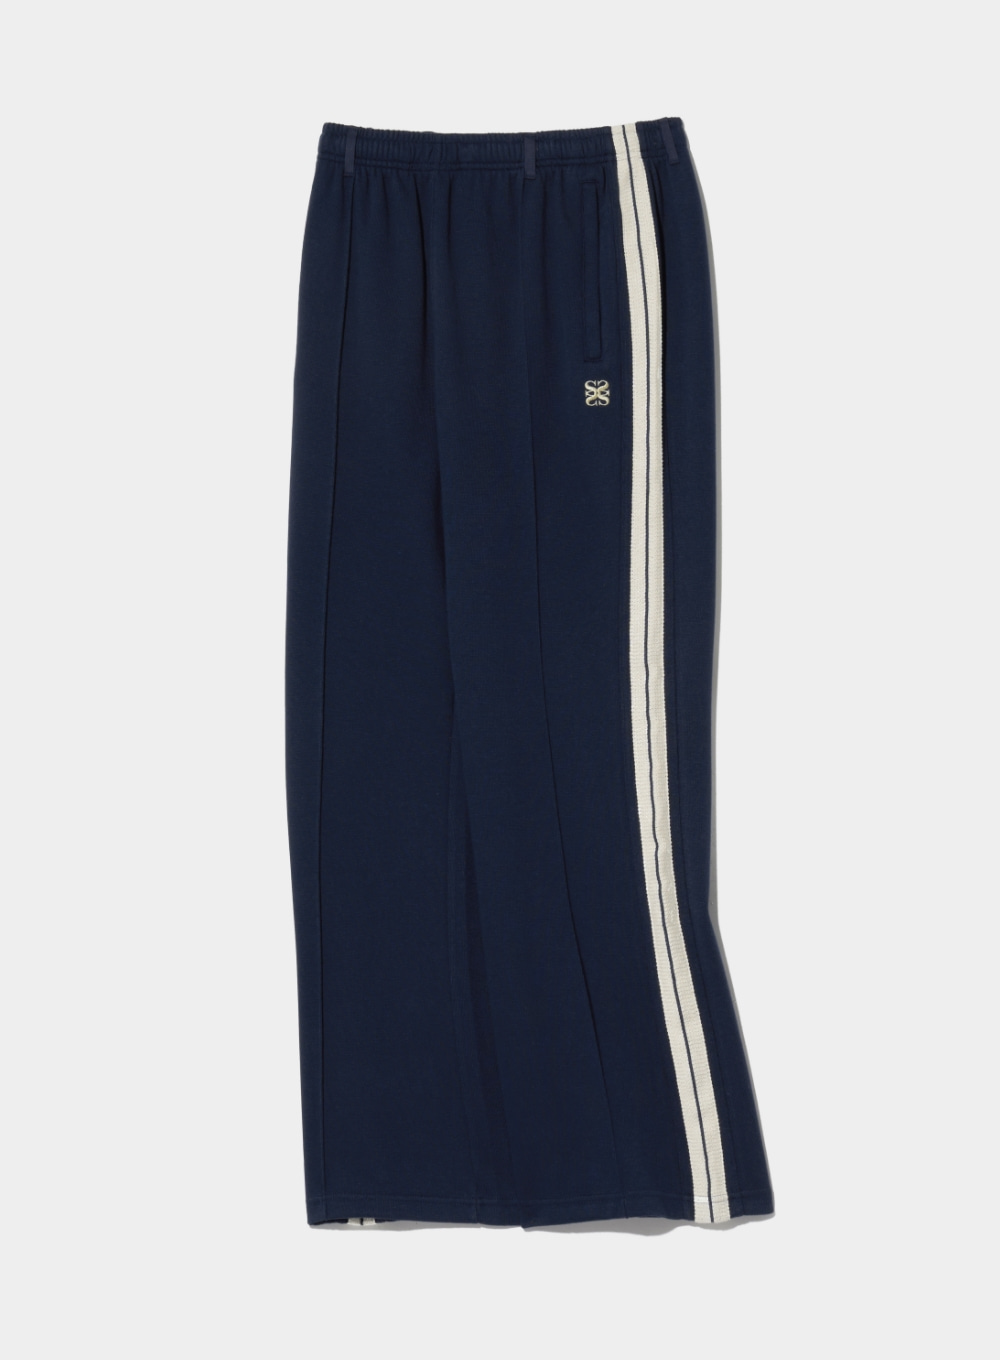 Lawton All Day Track Pants - Classic Navy